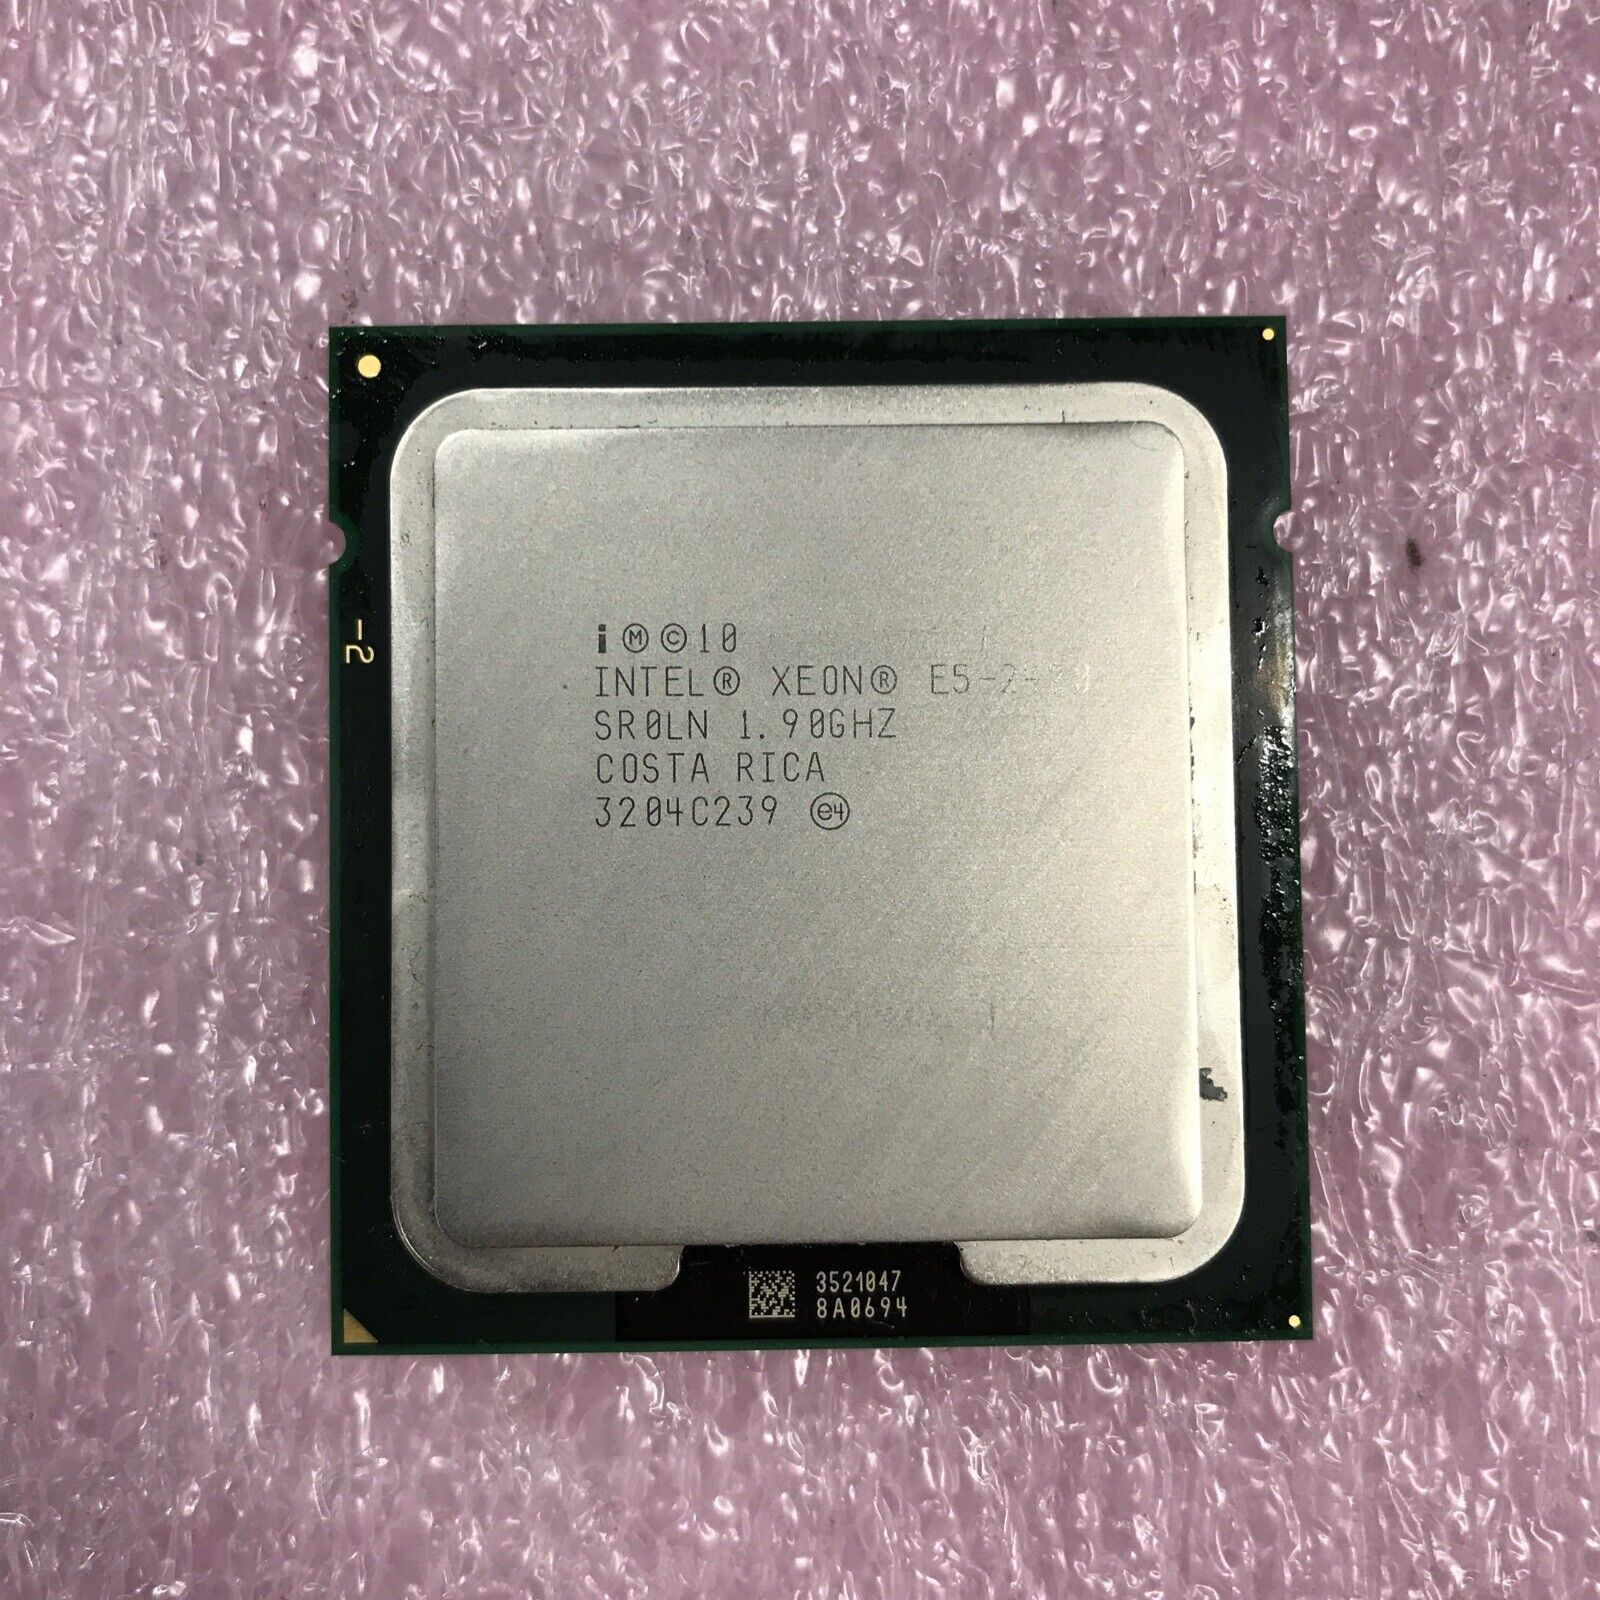 (lot of 2) Intel Xeon E5-2420 SR0LN 1.9Ghz (Tested and Working)